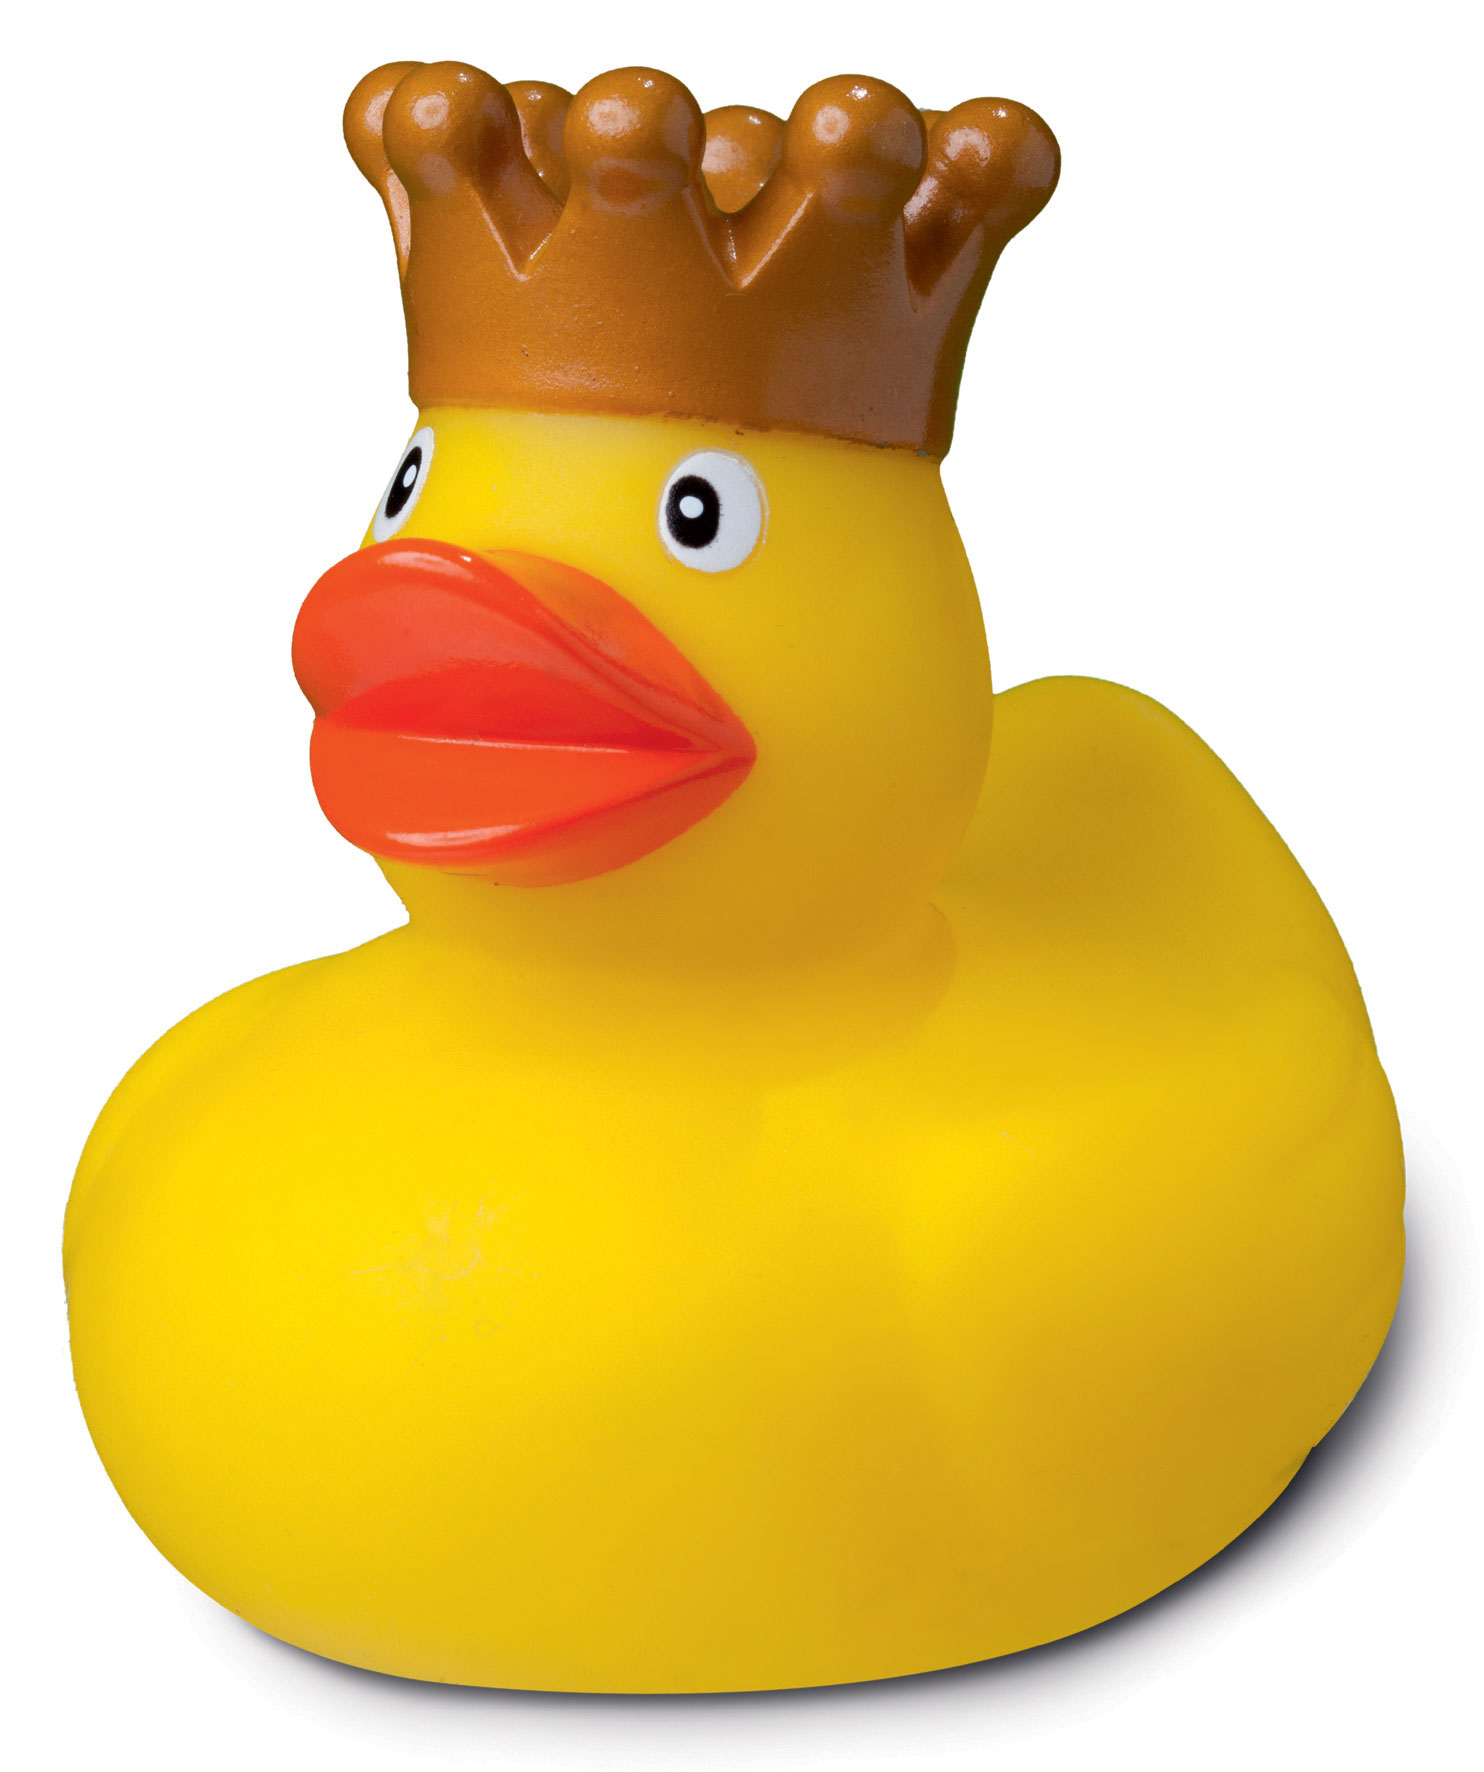 Squeaky duck, king